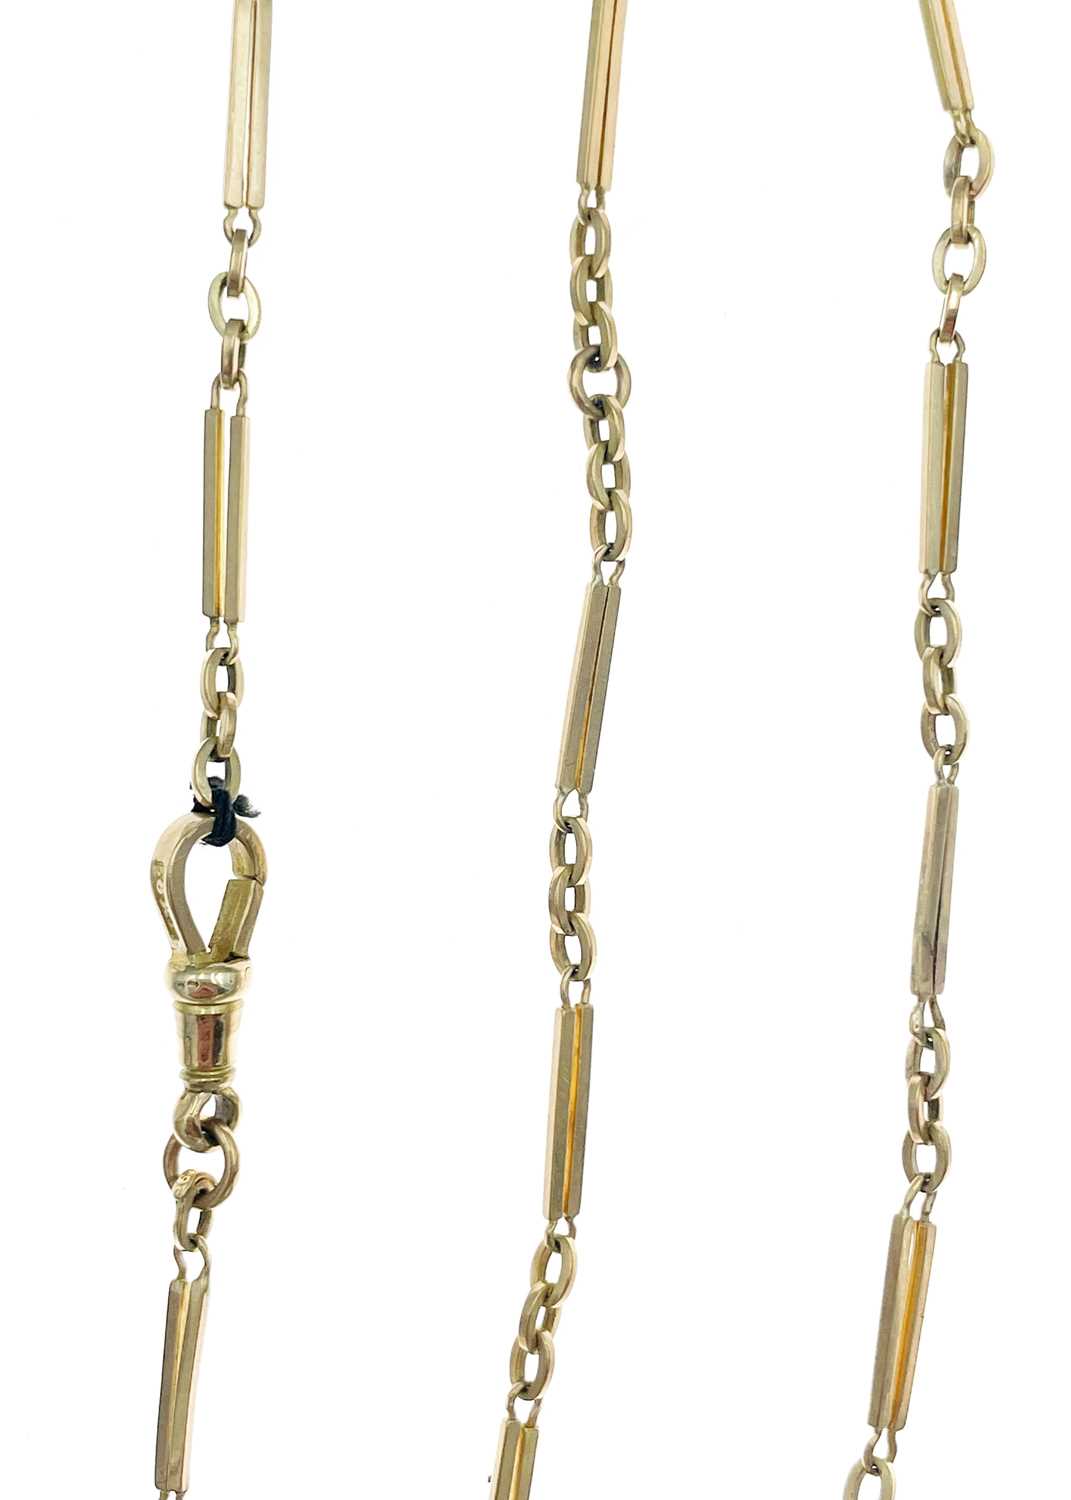 A 9ct gold slender Albert pocket watch chain. - Image 2 of 2